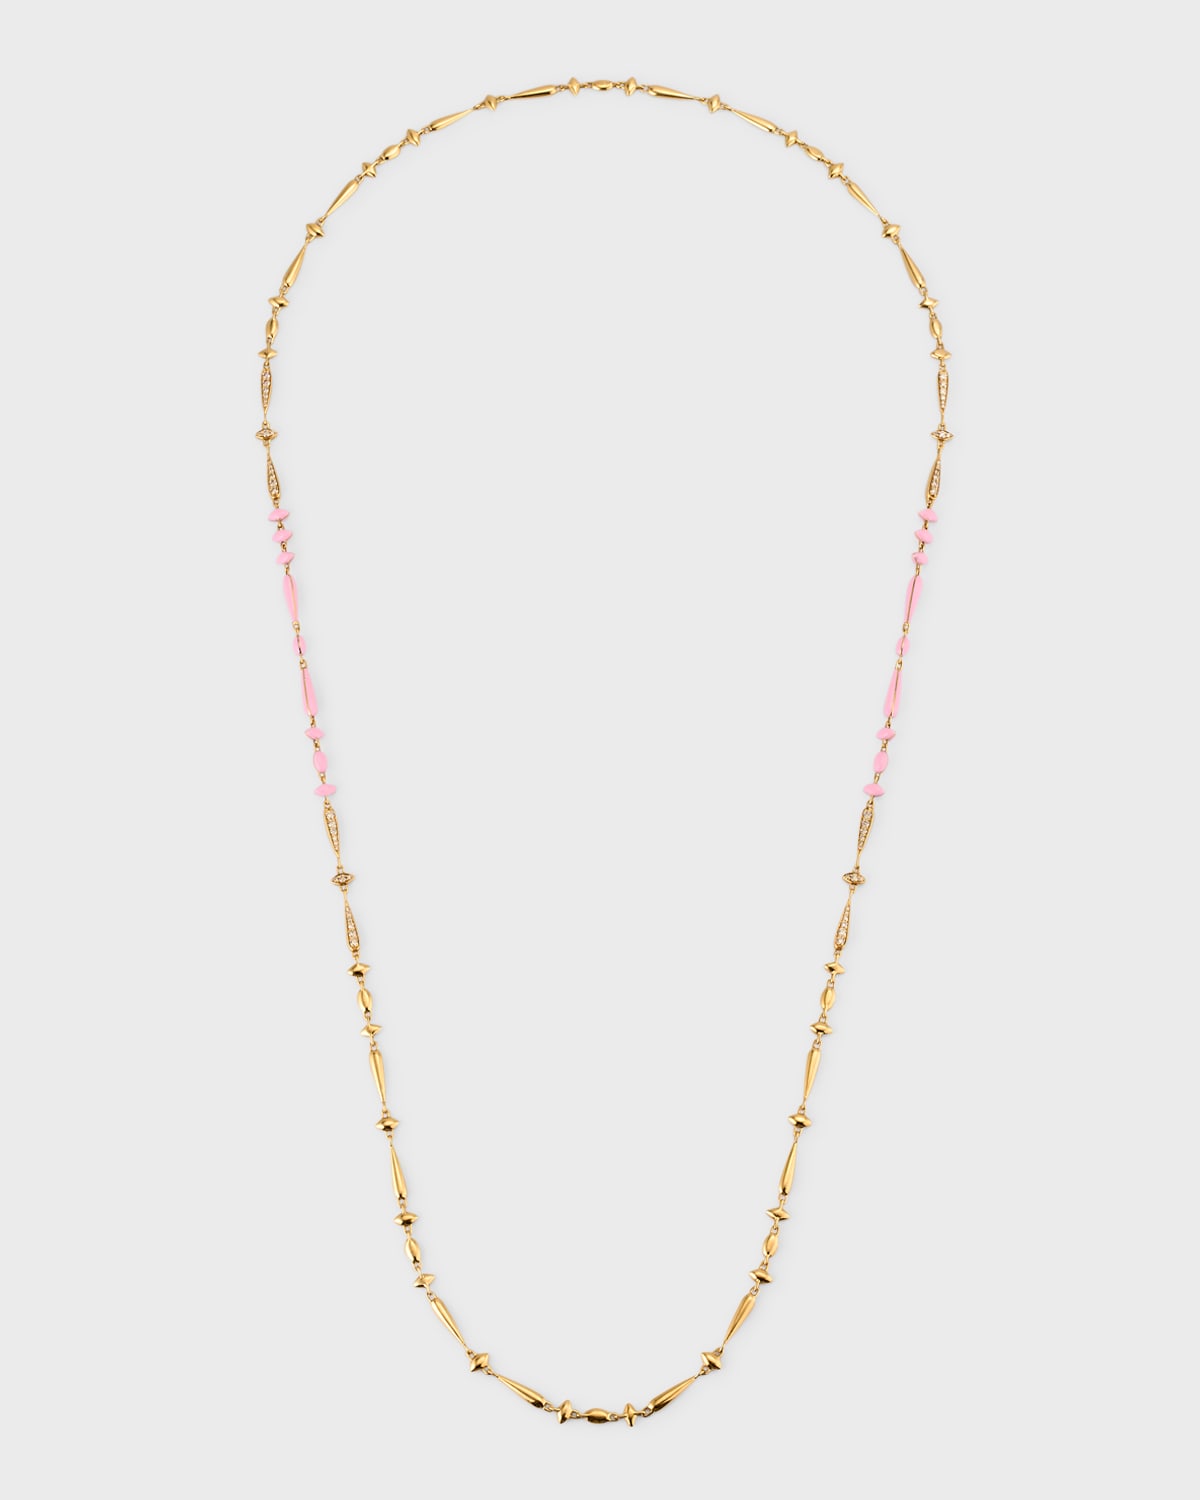 18K Yellow Gold Necklace with Brown Diamonds and Pink Ceramic